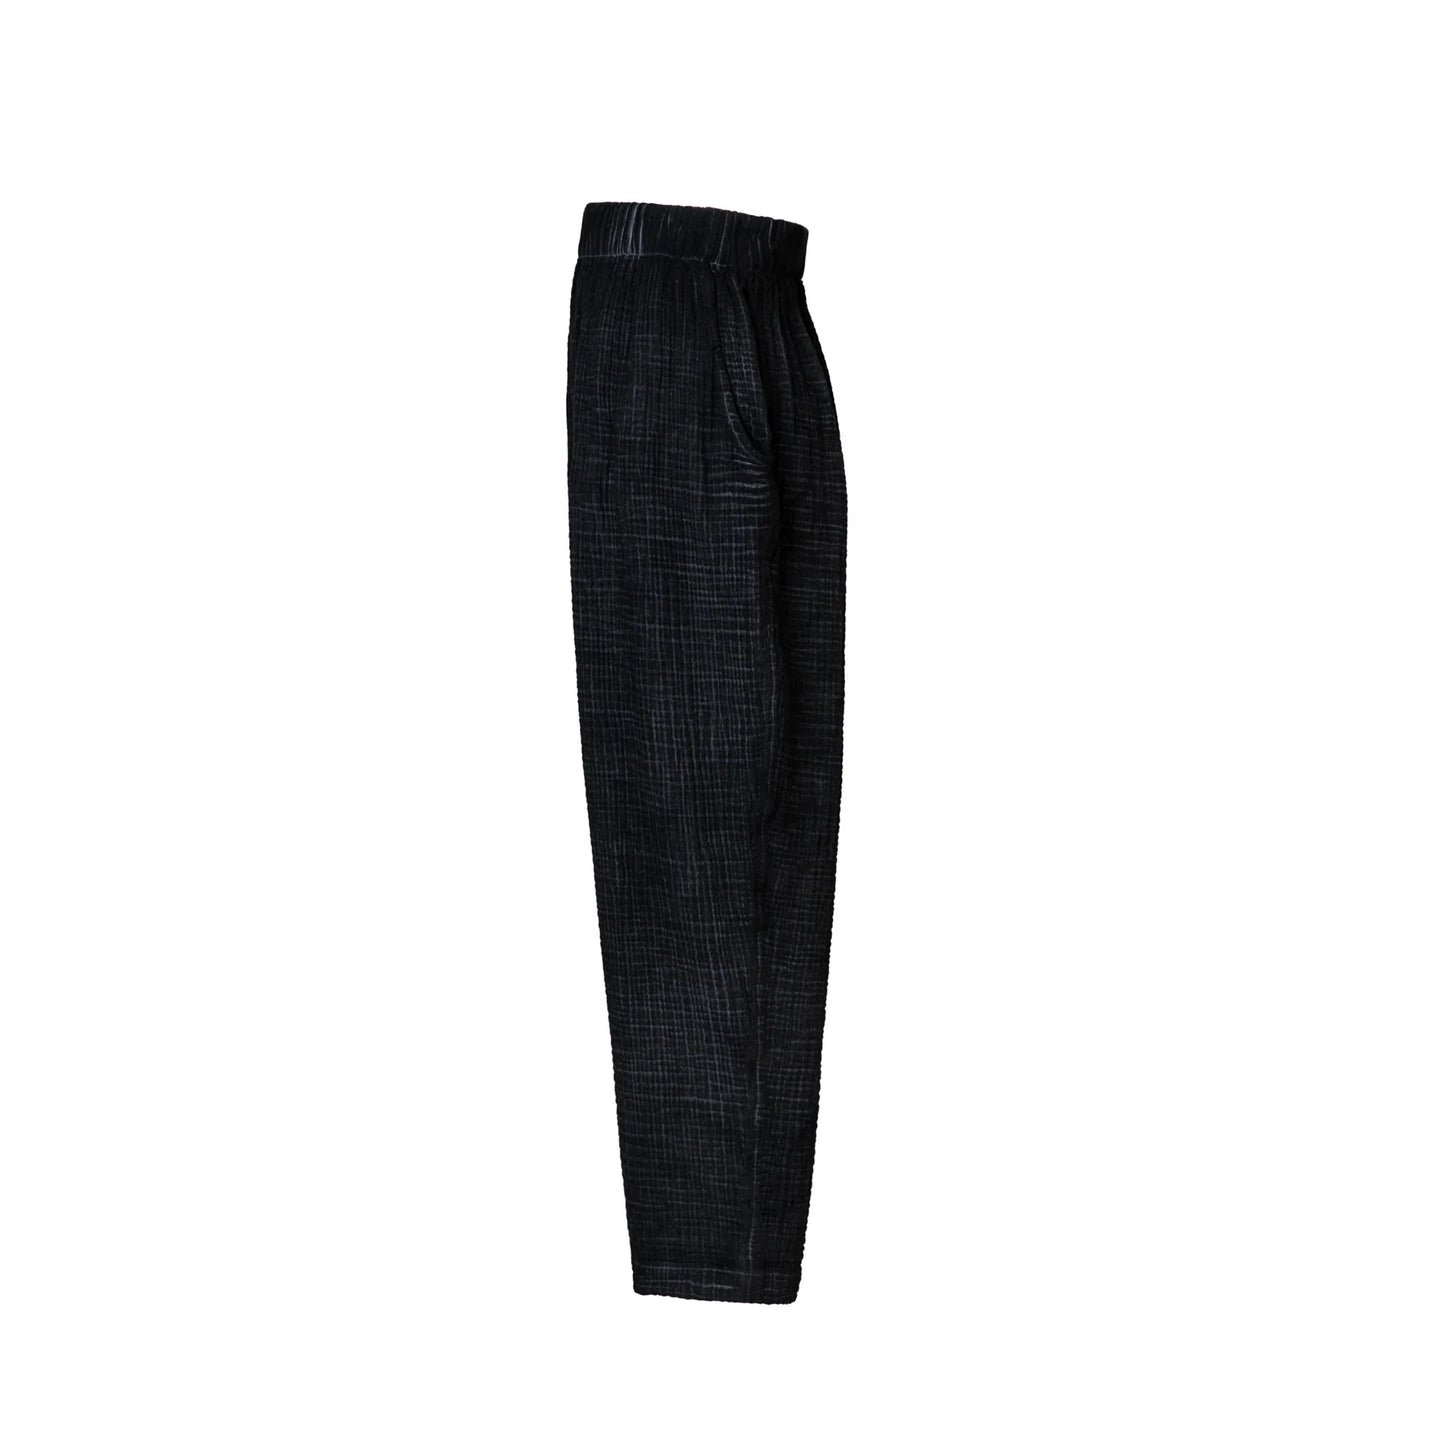 Crinkle Slouchy Pants - One-Sized - Black